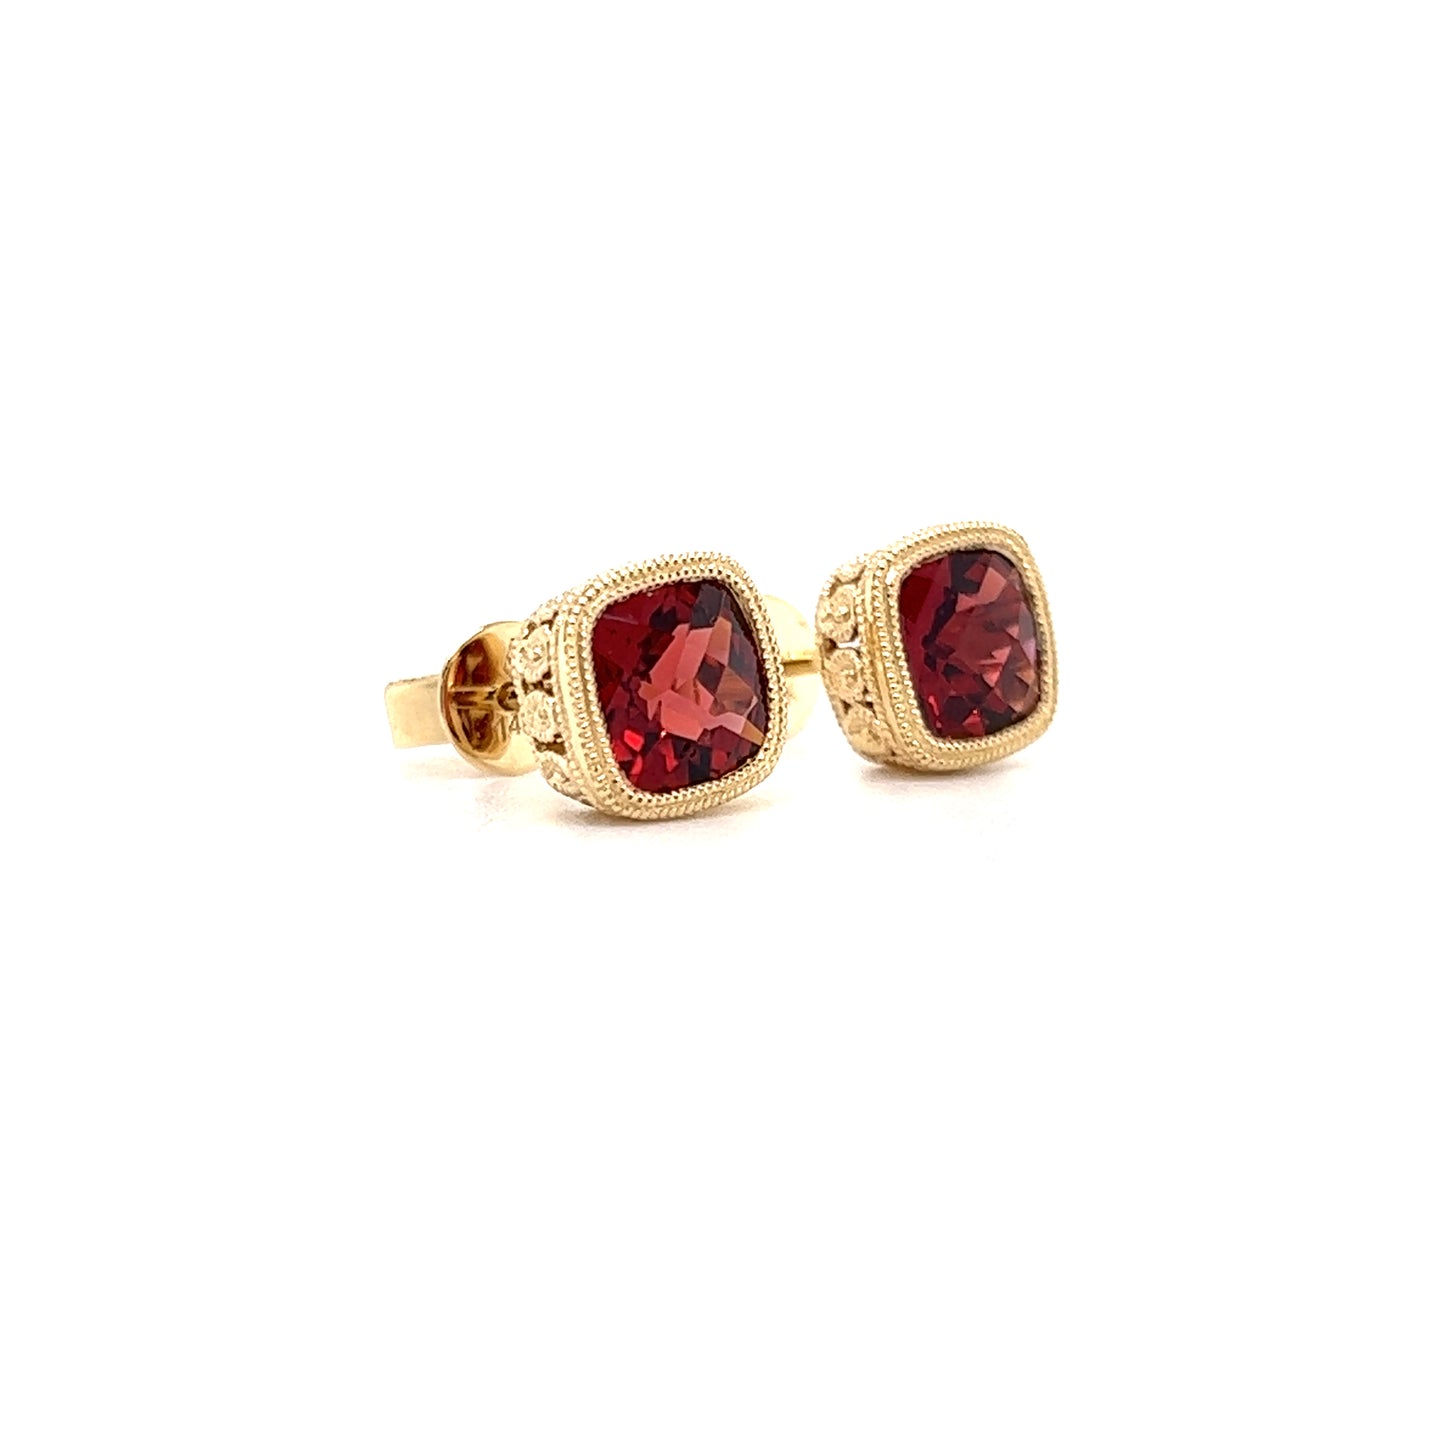 Garnet Stud Earrings with Milgrain and Filigree in 14K Yellow Gold Left Side View